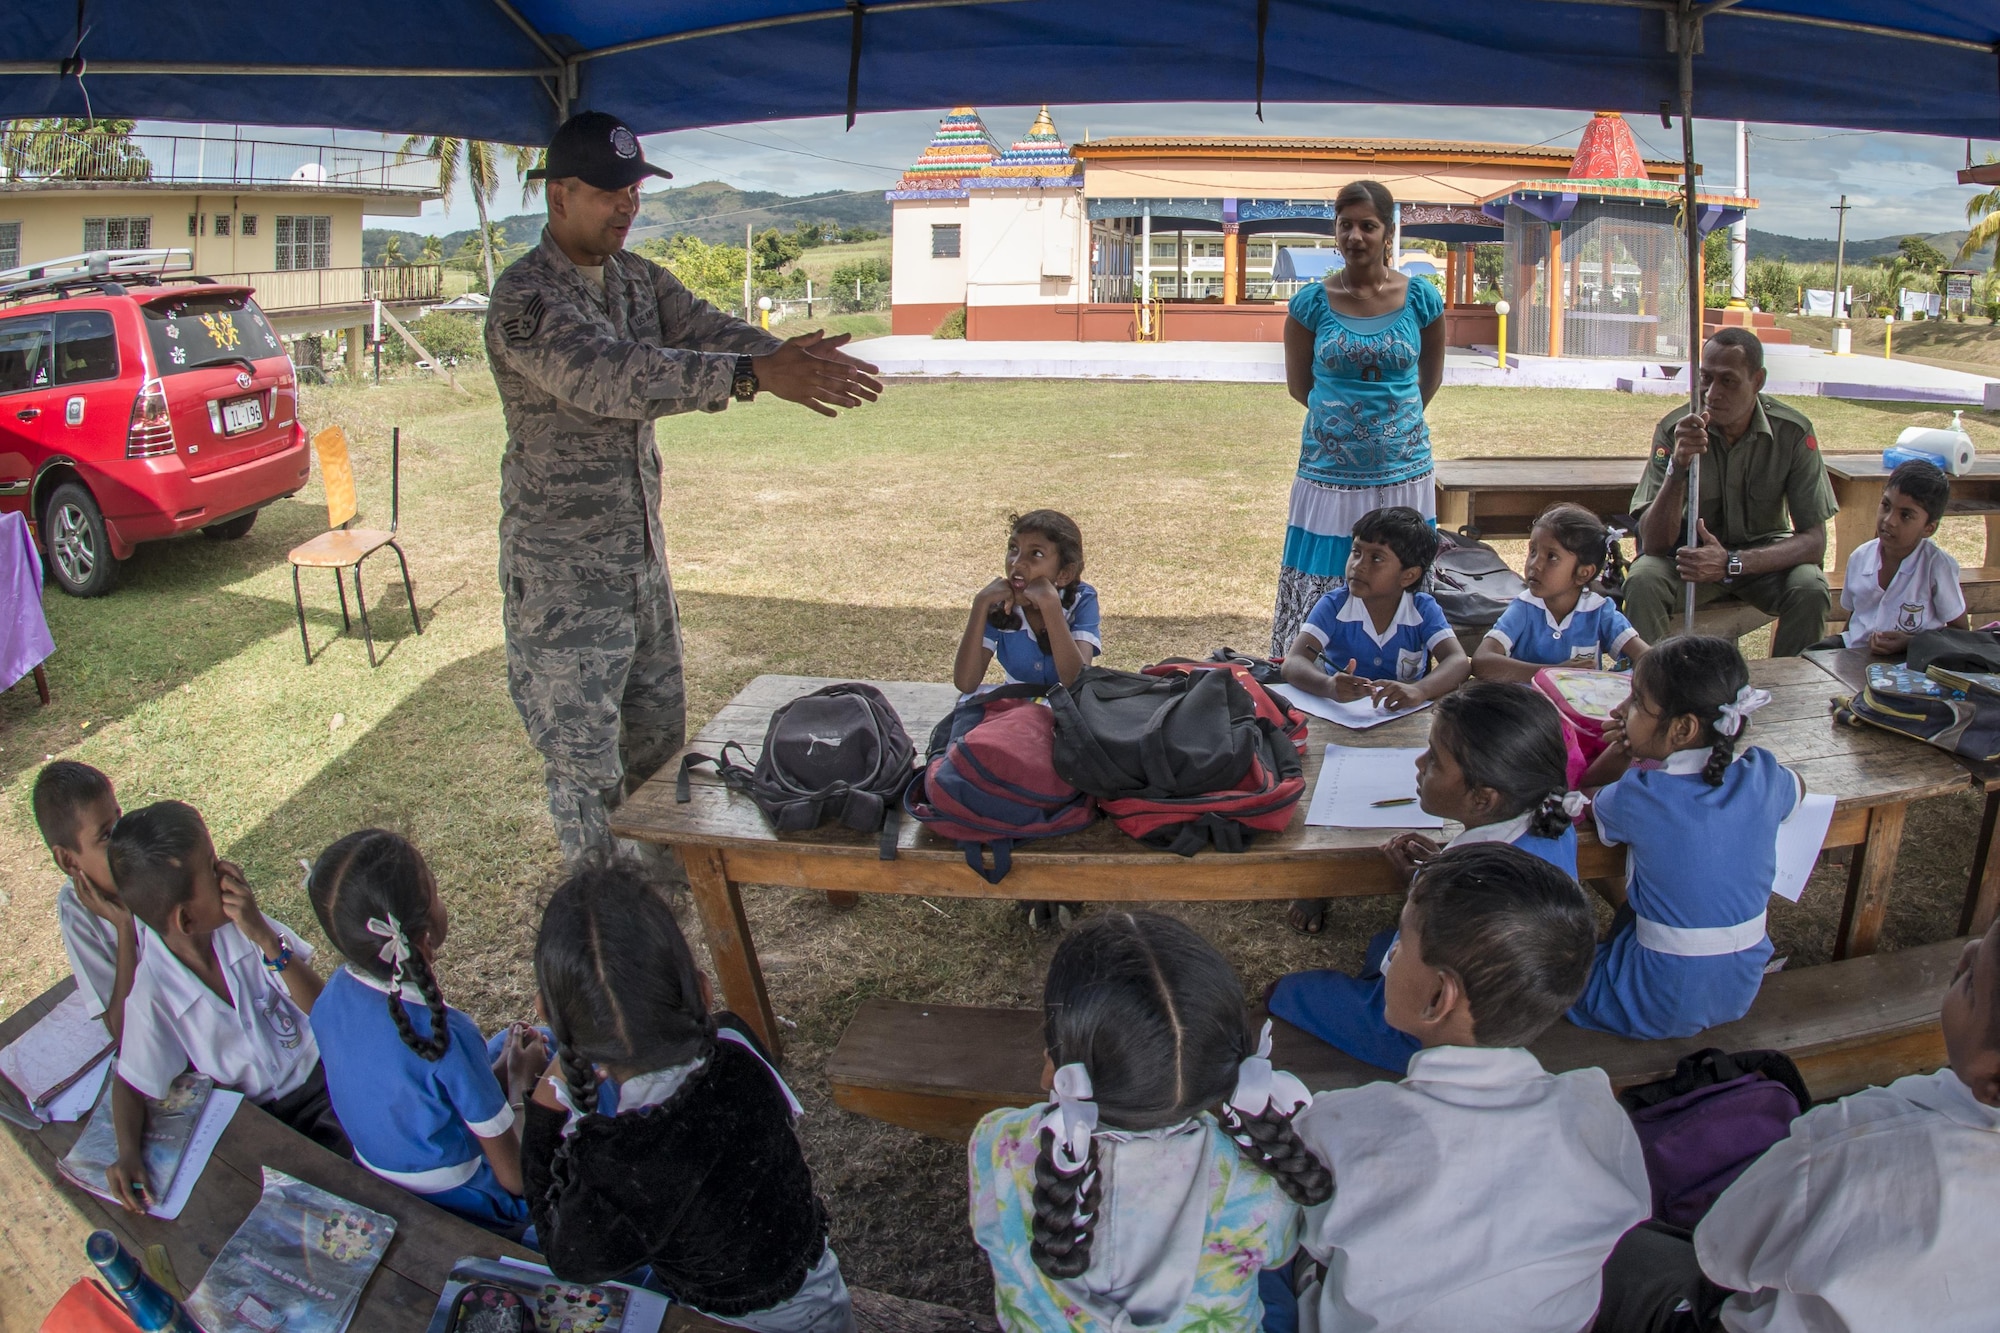 U.S. Air Force Staff Sgt. Angelo Corpuz, a public health specialist with the 35th Aerospace Medicine Squadron at Misawa Air Base, Japan, shows Fijian students how important proper handwashing is to prevent the spread of germs and disease at the Tagitagi Sangam School and Kindergarten in Tavua, Fiji, July 17, 2017. Corpuz is one of seven Misawa Airmen who joined more than 50 U.S. service members, their Fijian counterparts and more than five other nations from across the Indo-Asia-Pacific region to conduct Pacific Angel 17-3. The U.S. military strengthens its relationship with other nations’ militaries through mutually beneficial activities such as subject-matter expert exchanges, host nation visits, bilateral engagements and exercises, all a part of PACANGEL missions. (U.S. Air Force photo by Tech. Sgt. Benjamin W. Stratton)